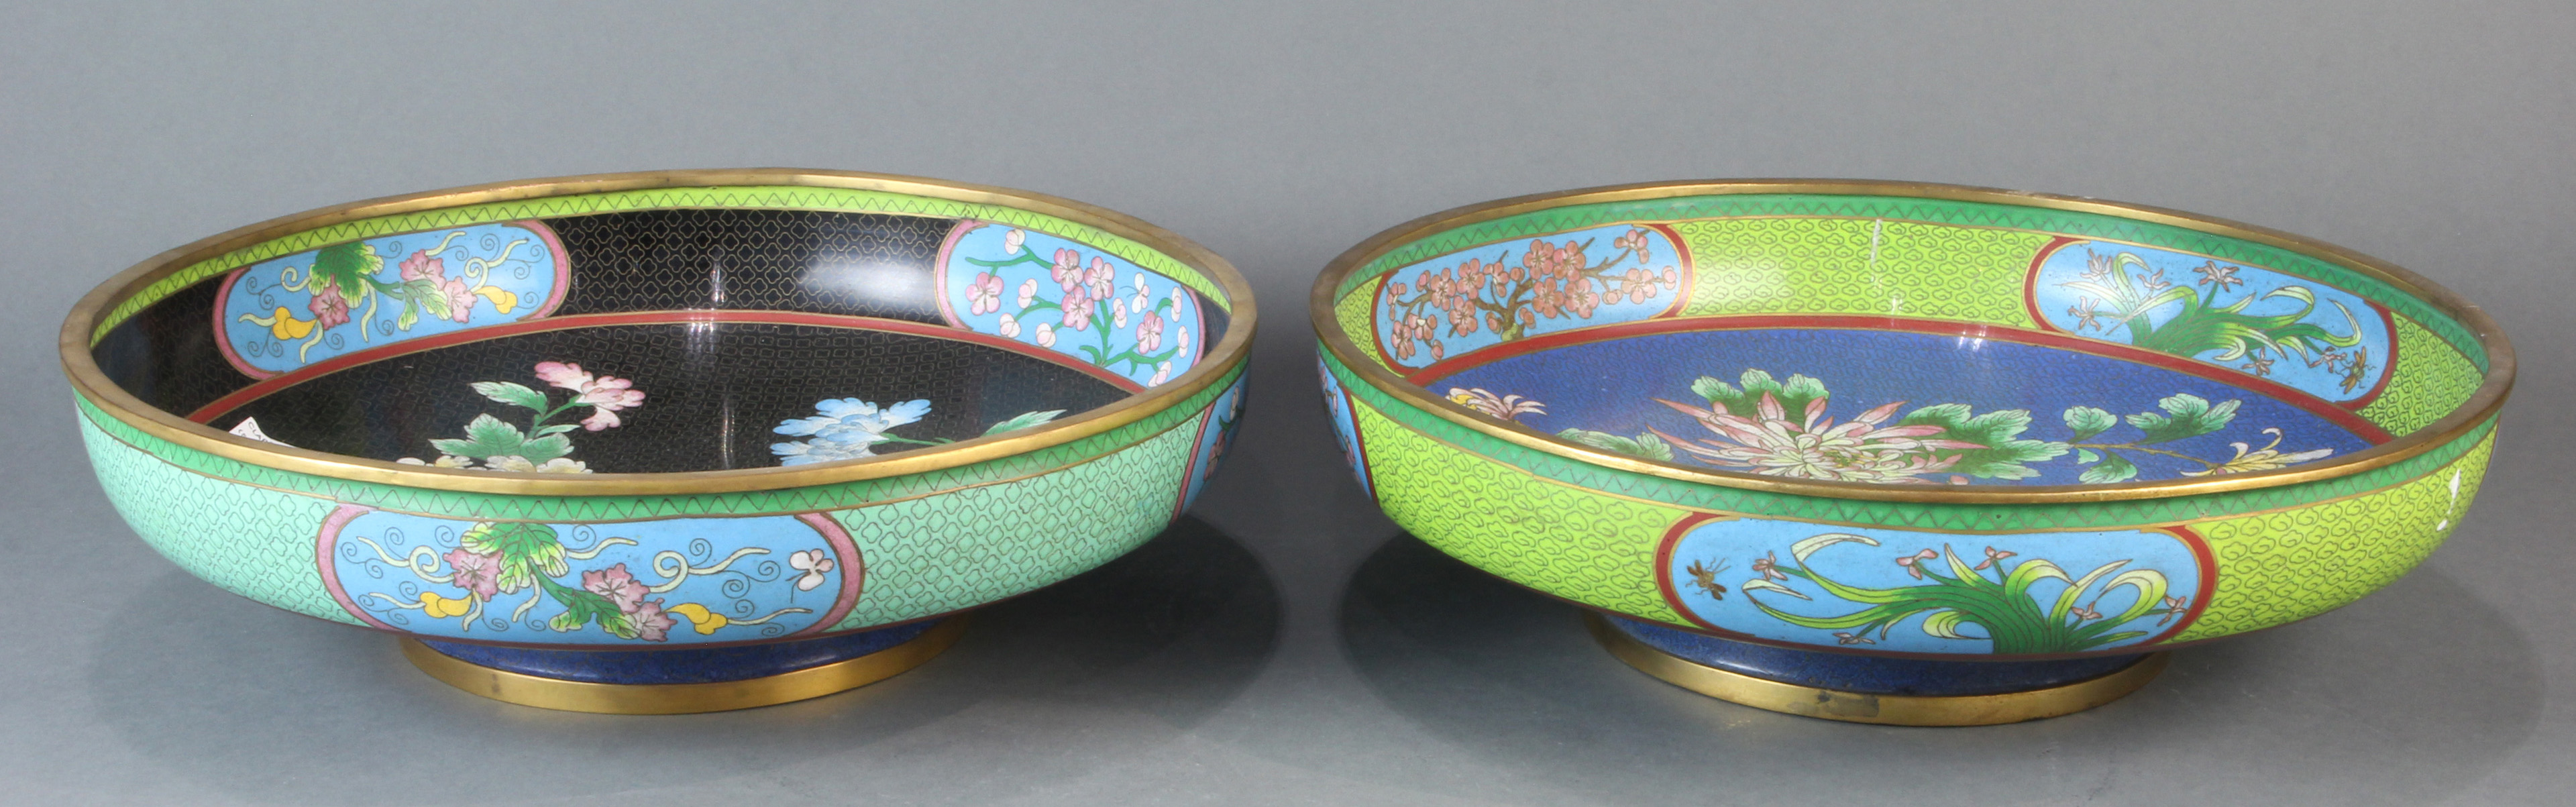 ASSOCIATED PAIR OF CHINESE CLOISONNE